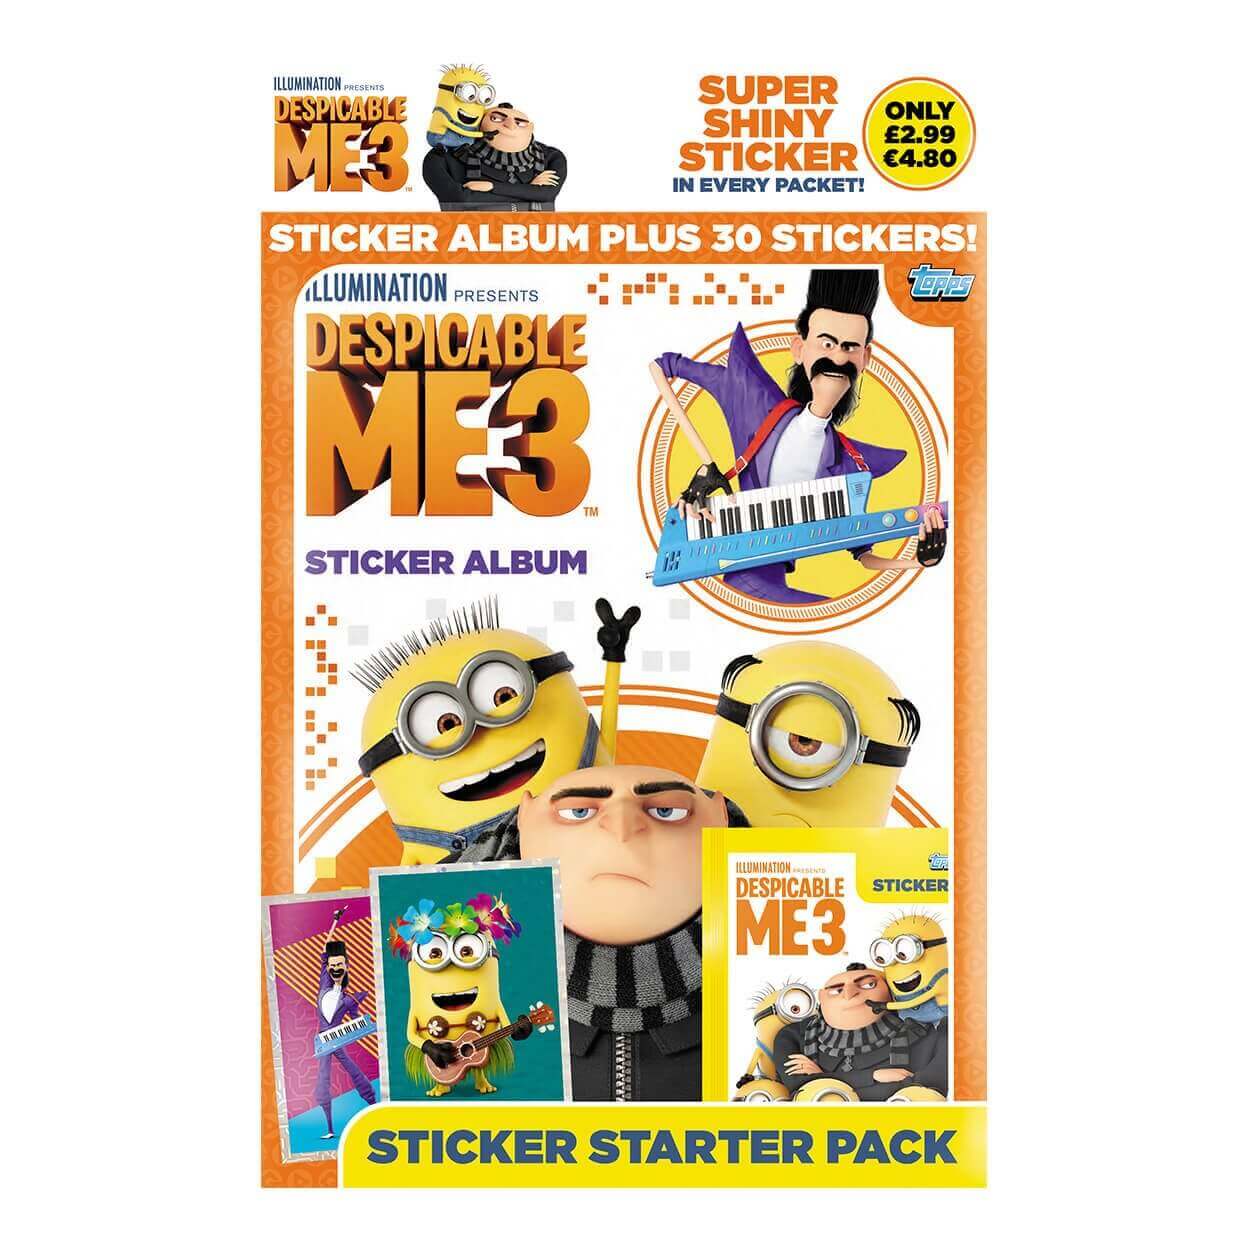 ToppsDespicable Me 3 Sticker CollectionProduct: Starter Pack (30 Stickers)Sticker CollectionEarthlets